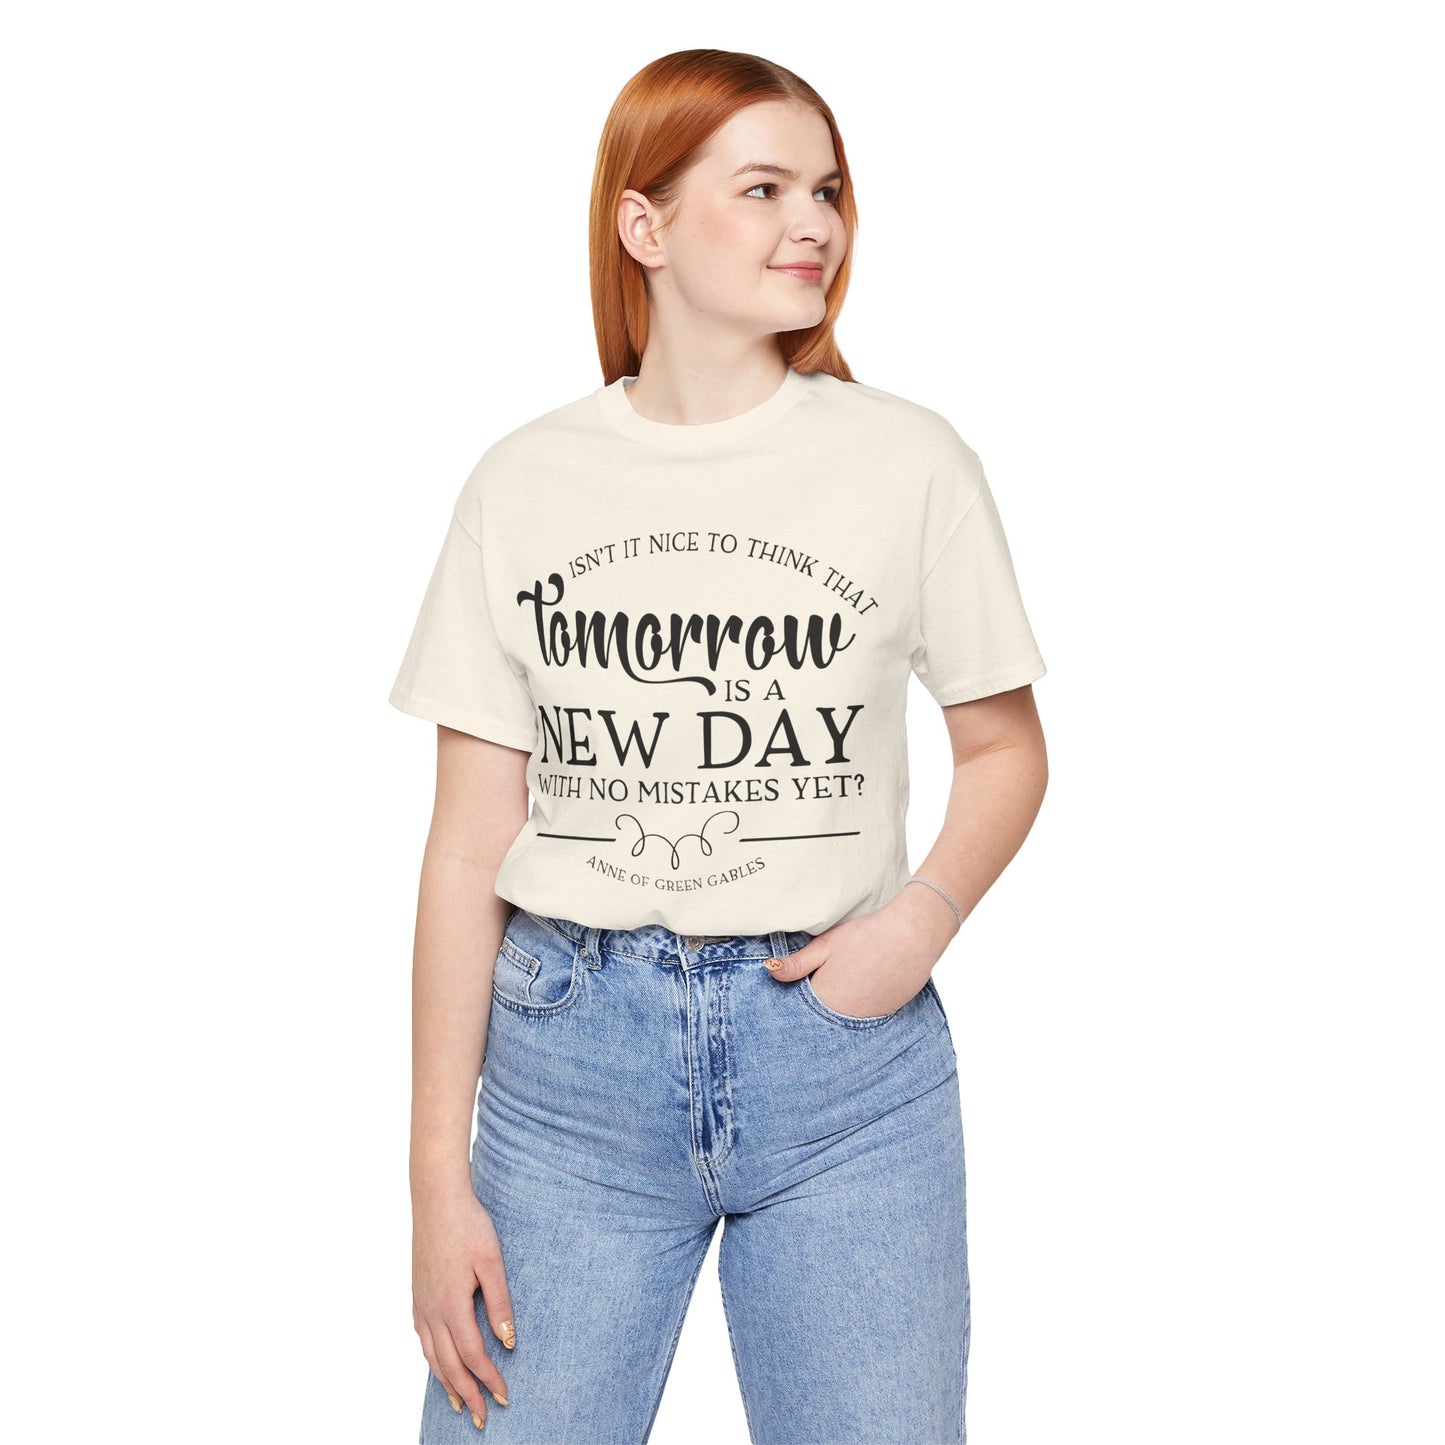 anne of green gables quote shirt